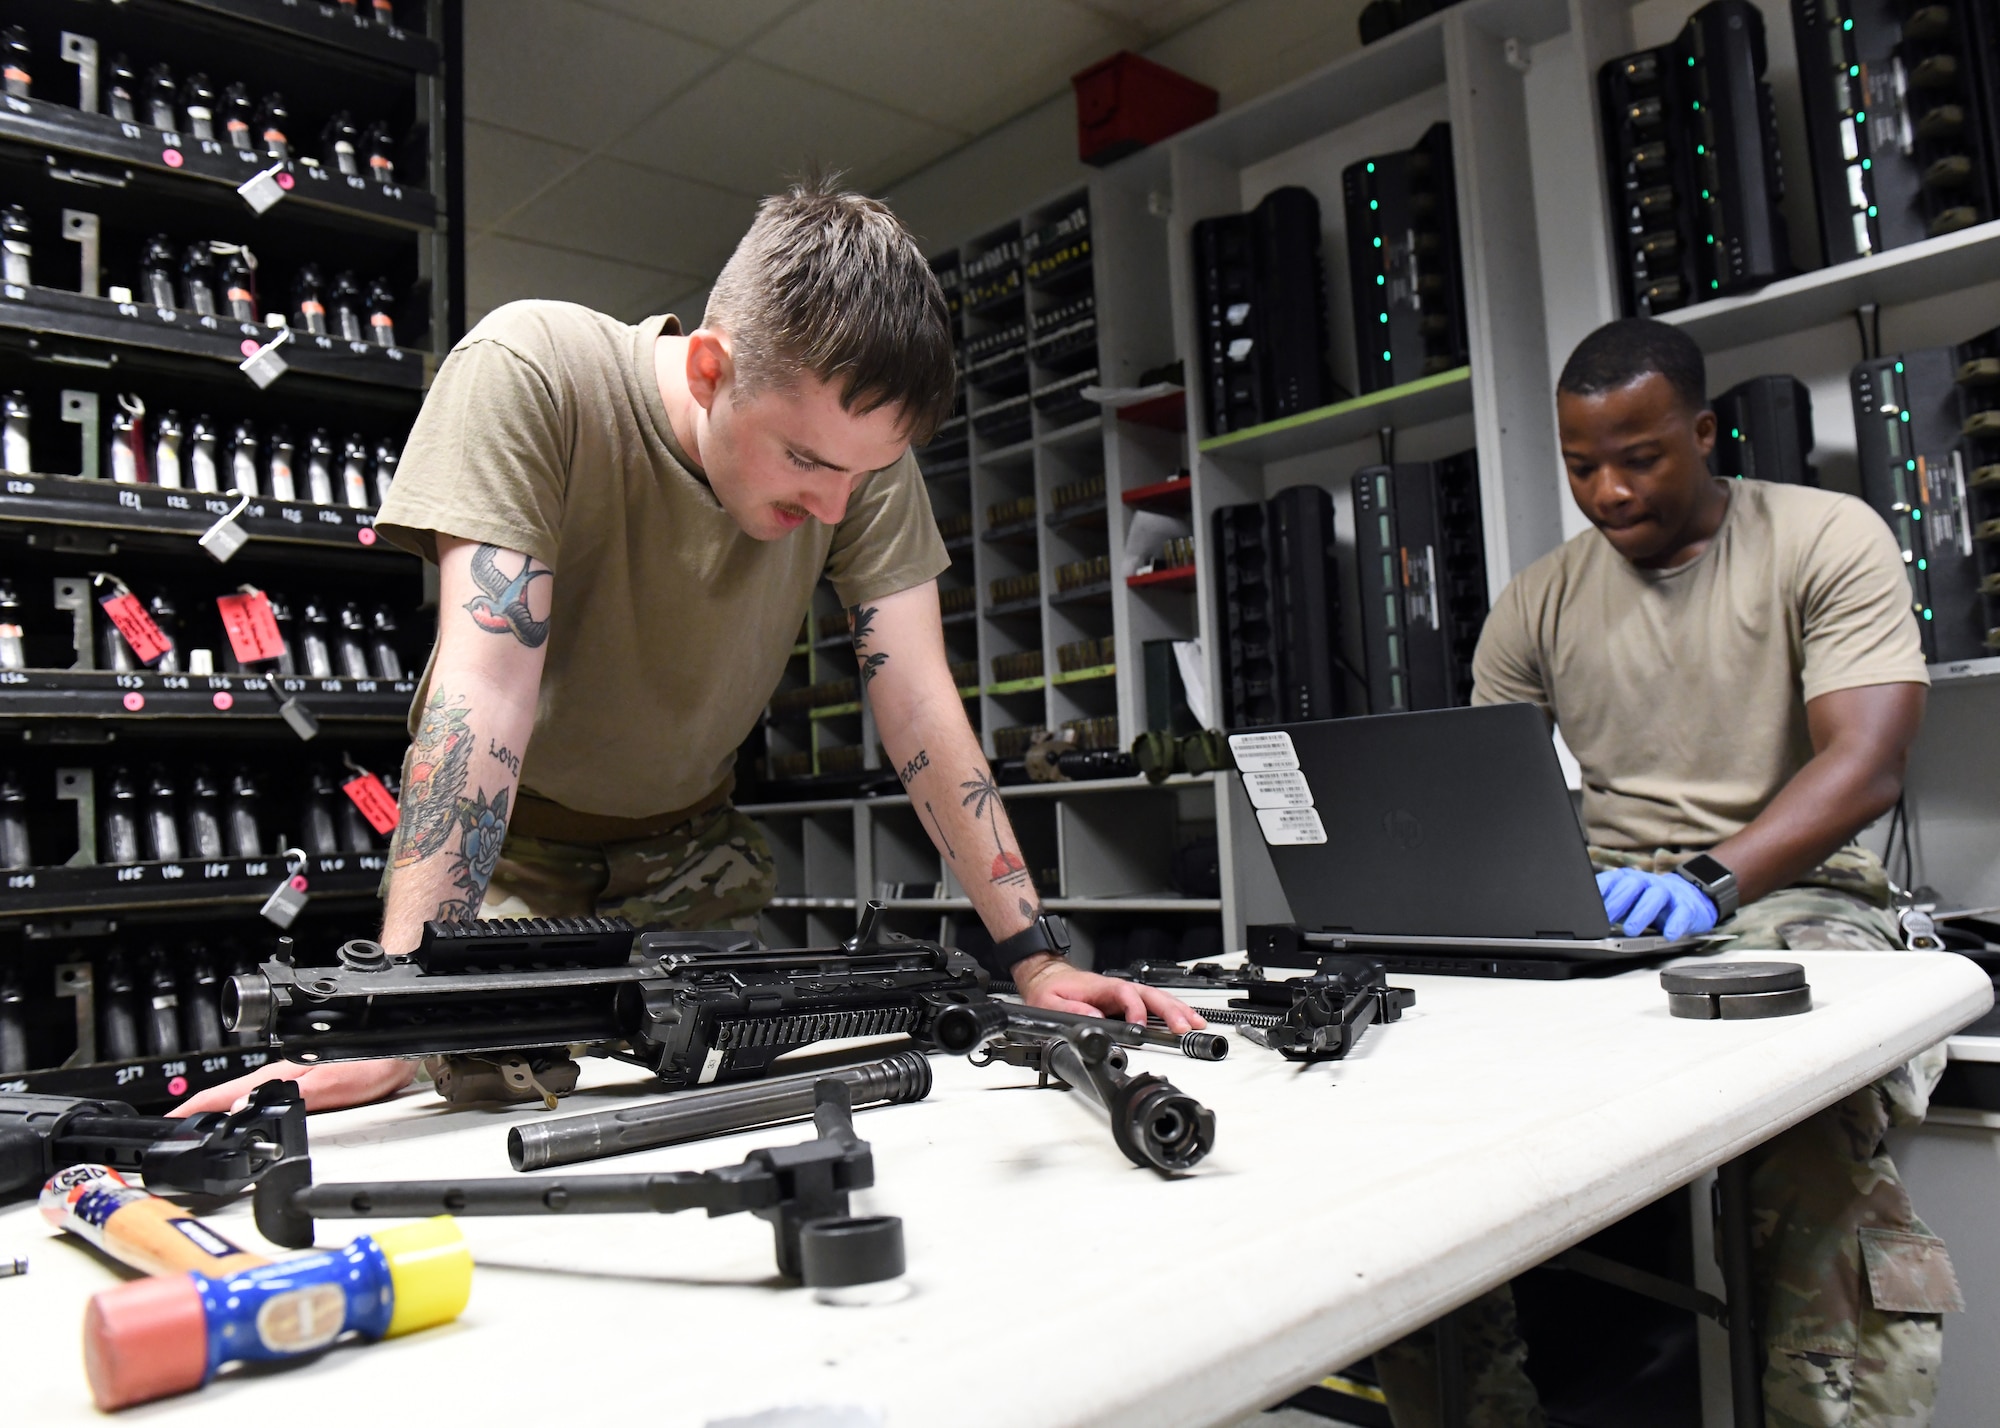 Senior Airman Richard Mitchell, 9th Security Forces Squadron combat arms instructor (left), and Staff Sgt. Ansumana Turray, 9th SFS assistant NCOIC of combat arms, conduct a weapon inspection at the Security Forces armory, June 26, 2020, at Beale Air Force Base California. Combat arms instructors ensure all Recce Town weapons are in working condition. (U.S. Air Force photo by Airman 1st Class Luis A. Ruiz-Vazquez)